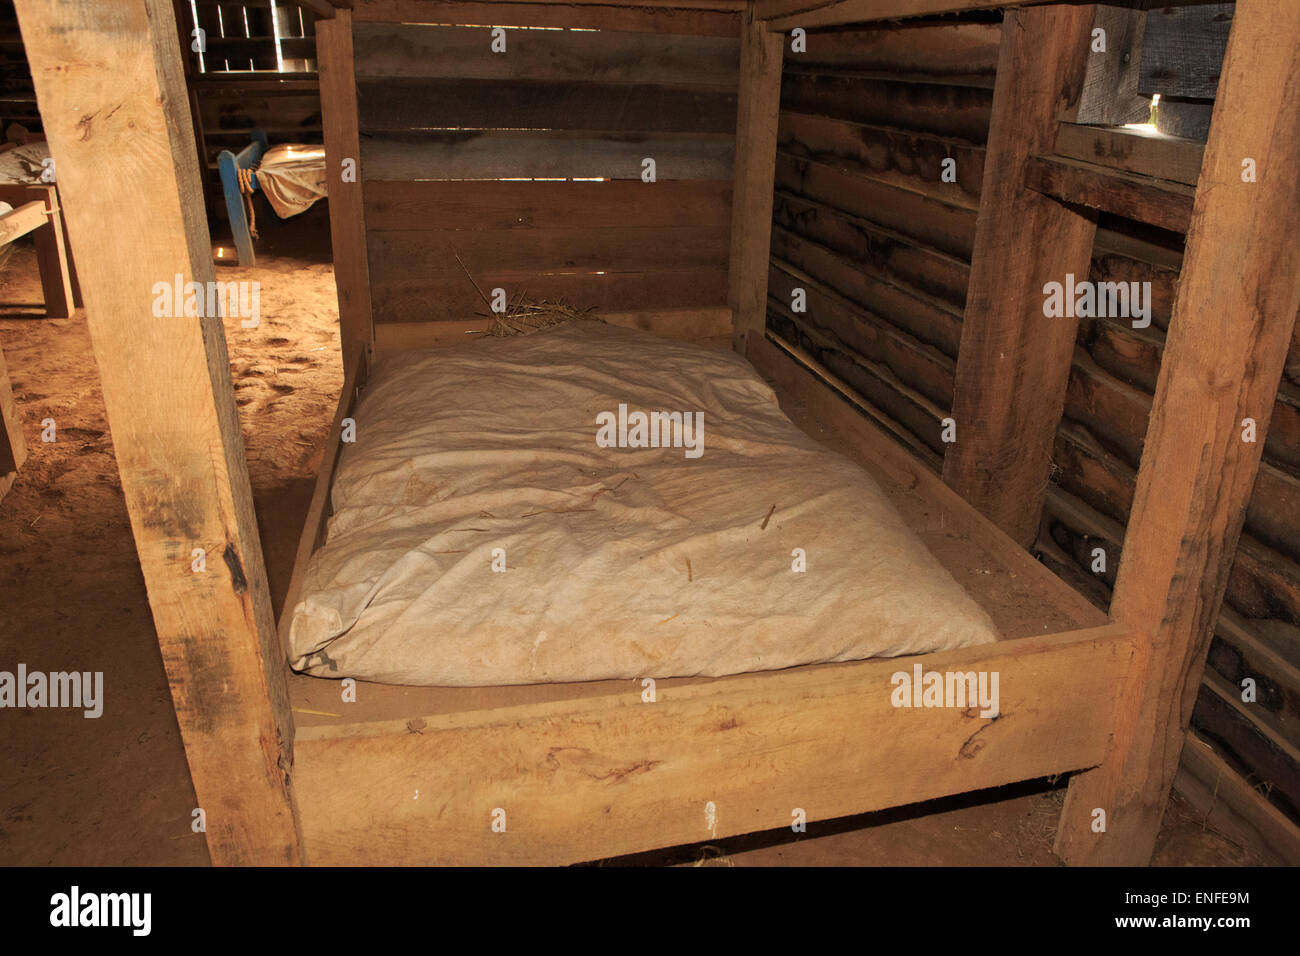 Bed and straw bedding in the barracks of Fort Loudoun State Part, historical French and Indian war site. Stock Photo